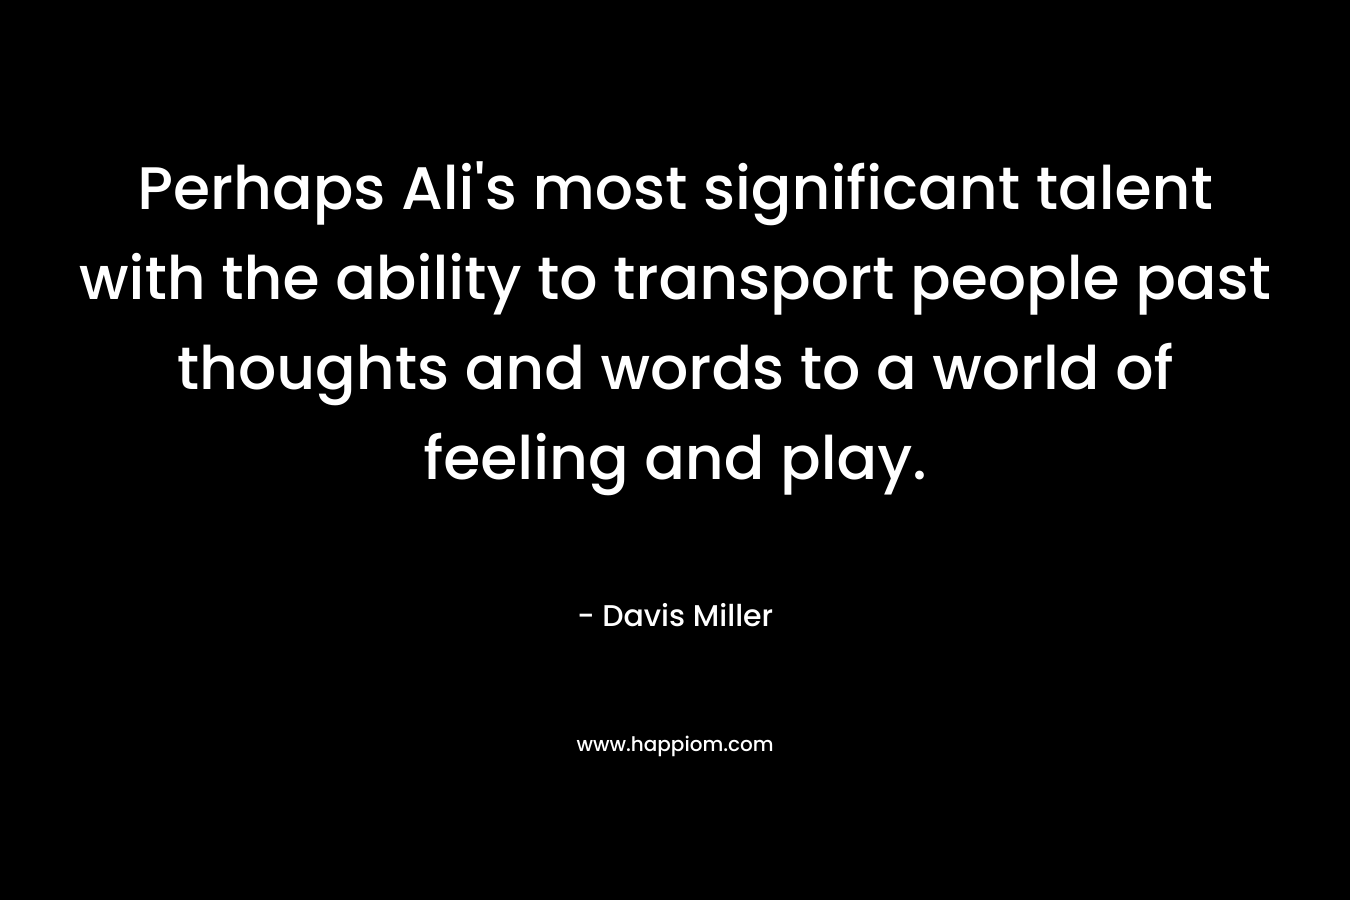 Perhaps Ali’s most significant talent with the ability to transport people past thoughts and words to a world of feeling and play. – Davis Miller